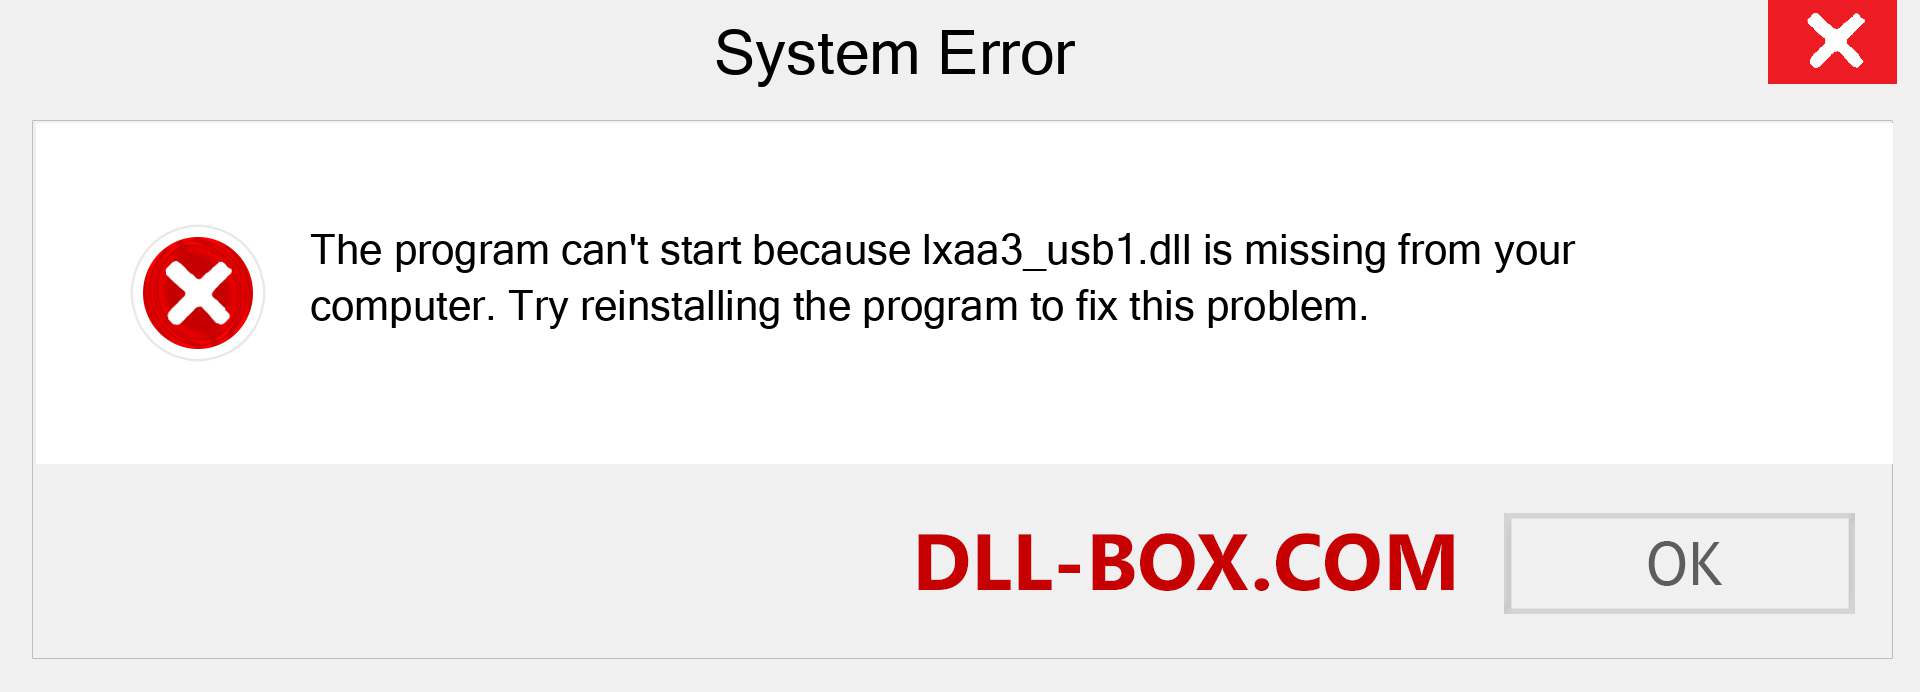  lxaa3_usb1.dll file is missing?. Download for Windows 7, 8, 10 - Fix  lxaa3_usb1 dll Missing Error on Windows, photos, images